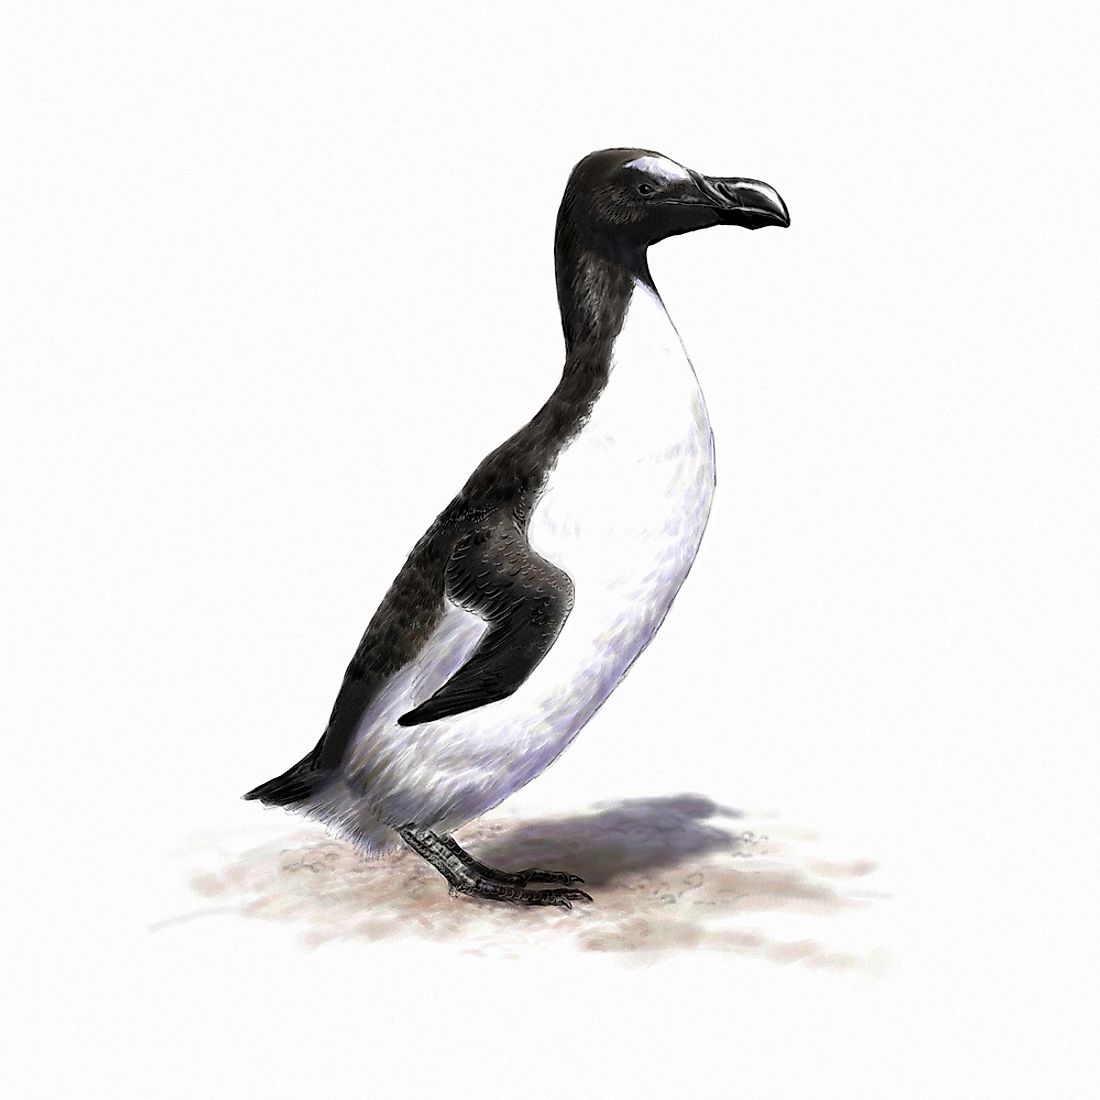 An illustration of the great auk. 